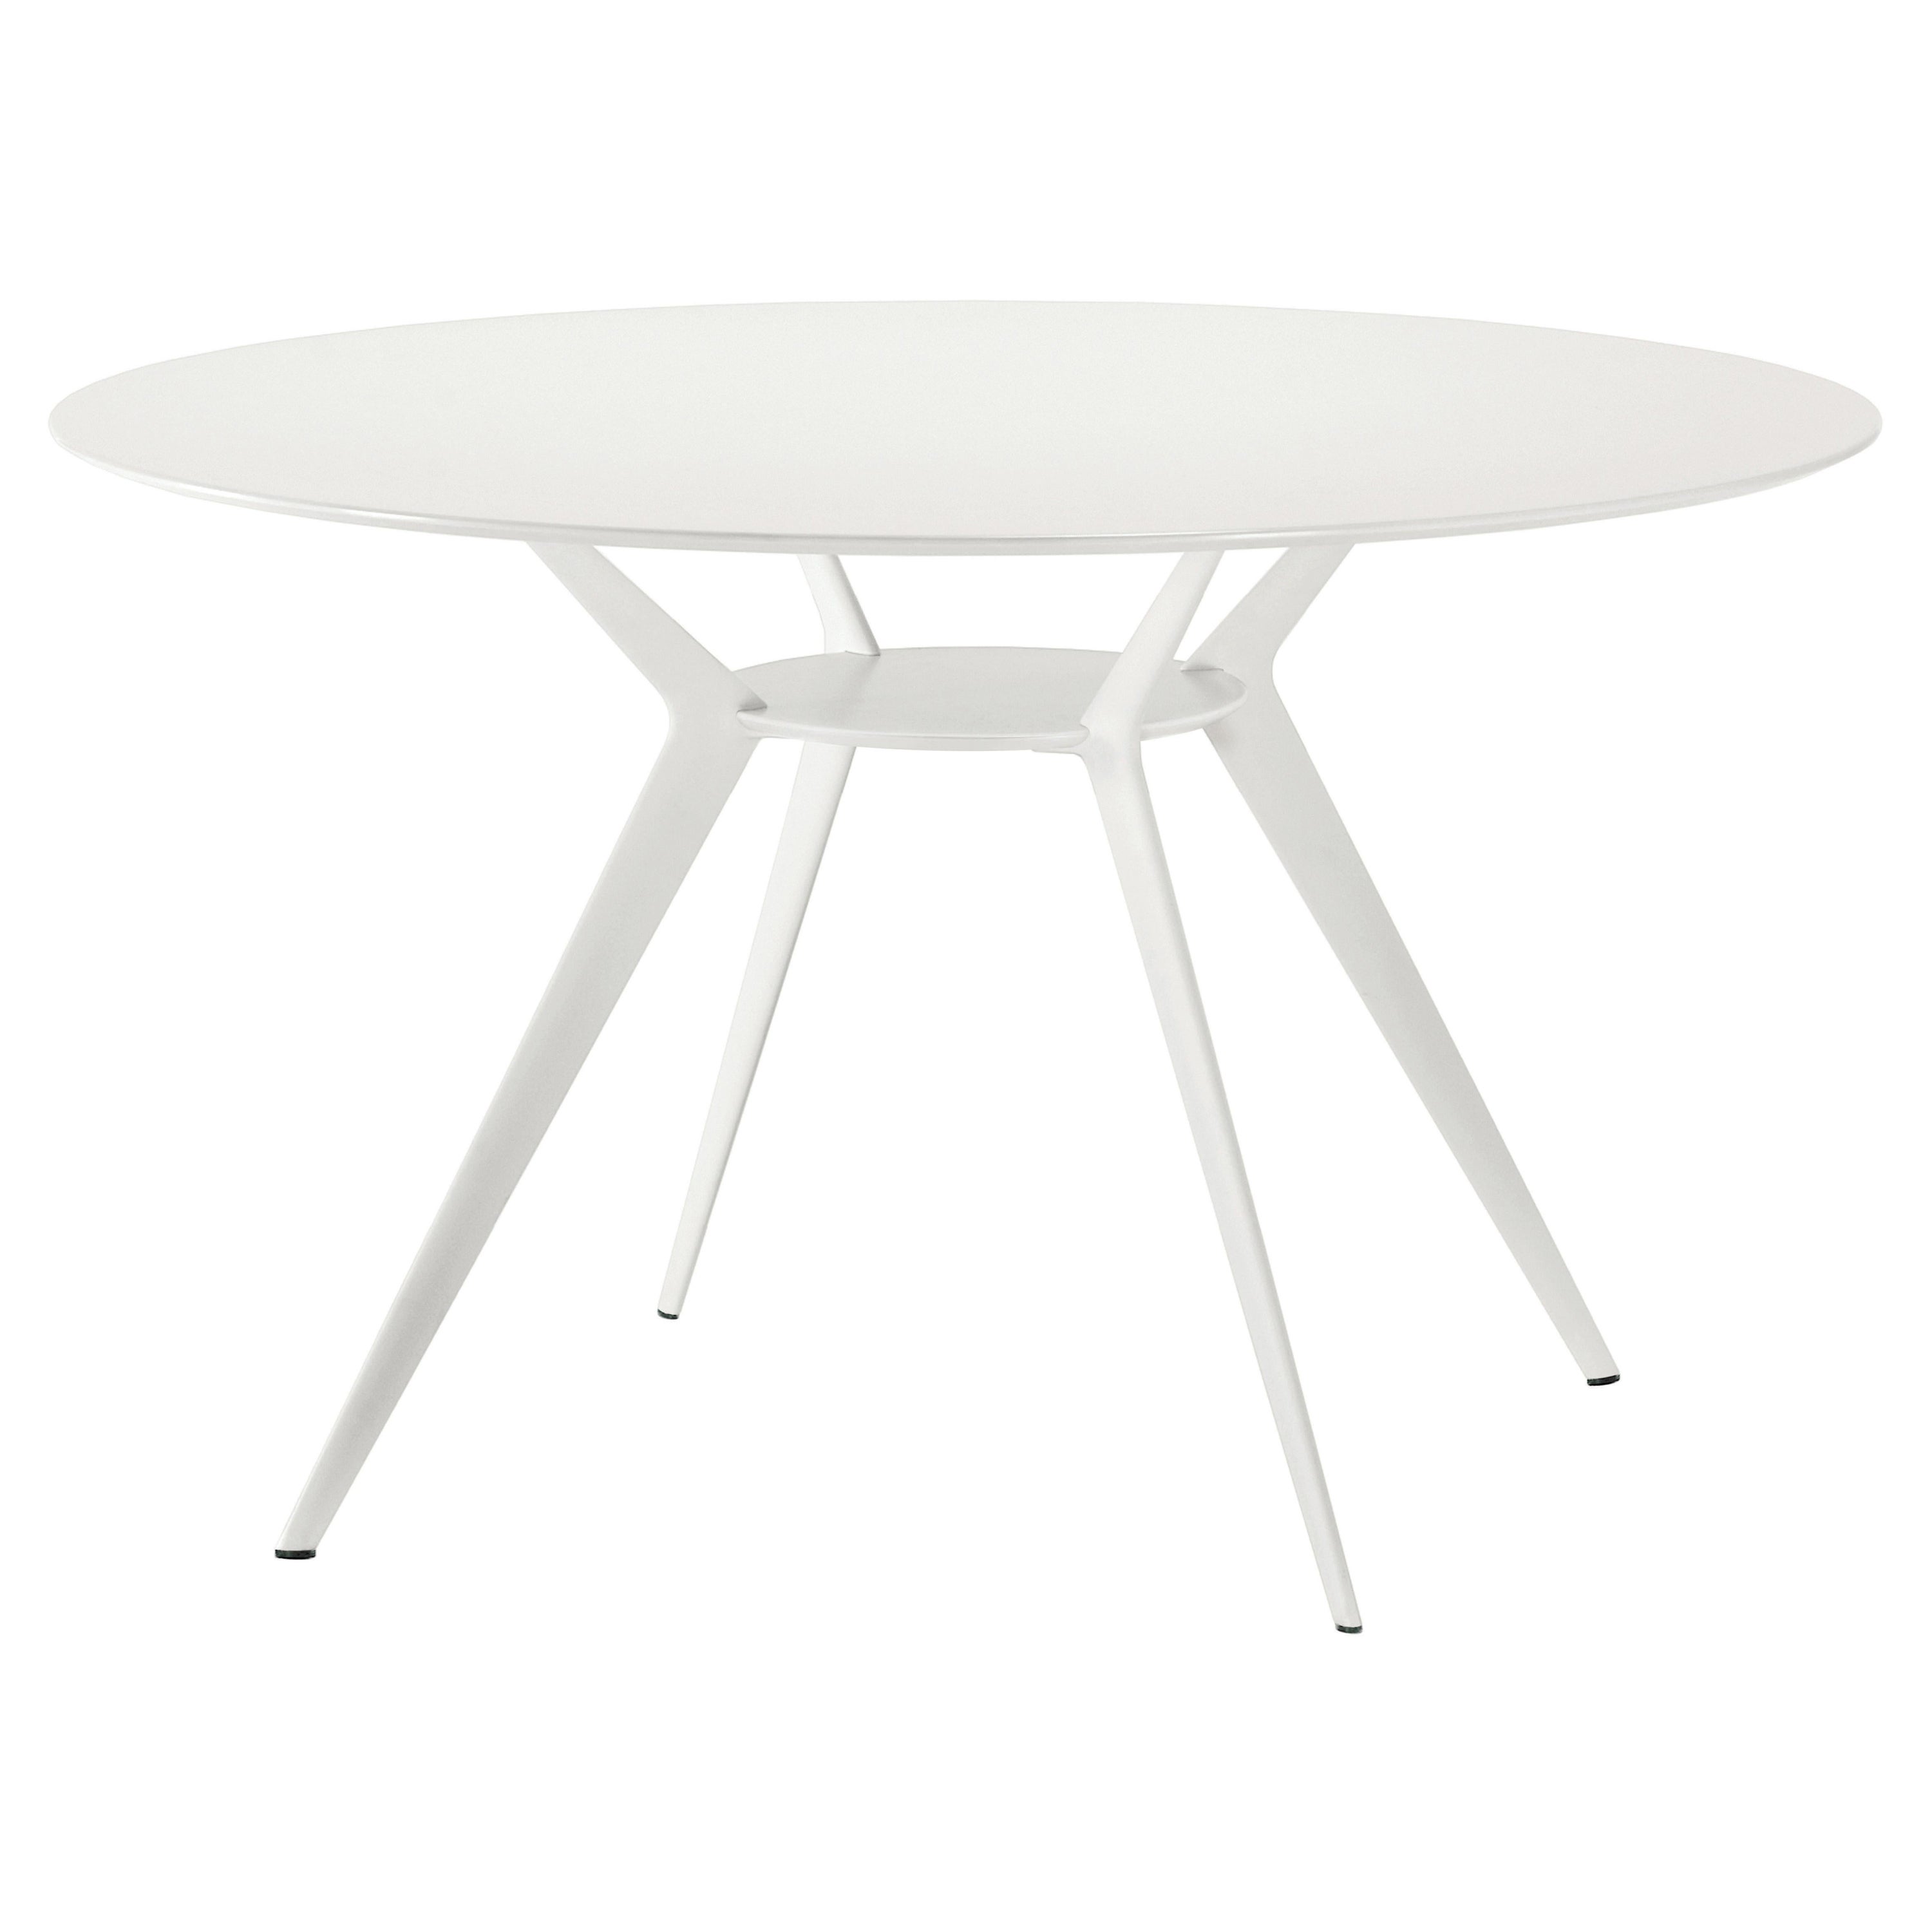 Alias Biplane 402 Table in White MDF Top with White Lacquered Aluminium Frame